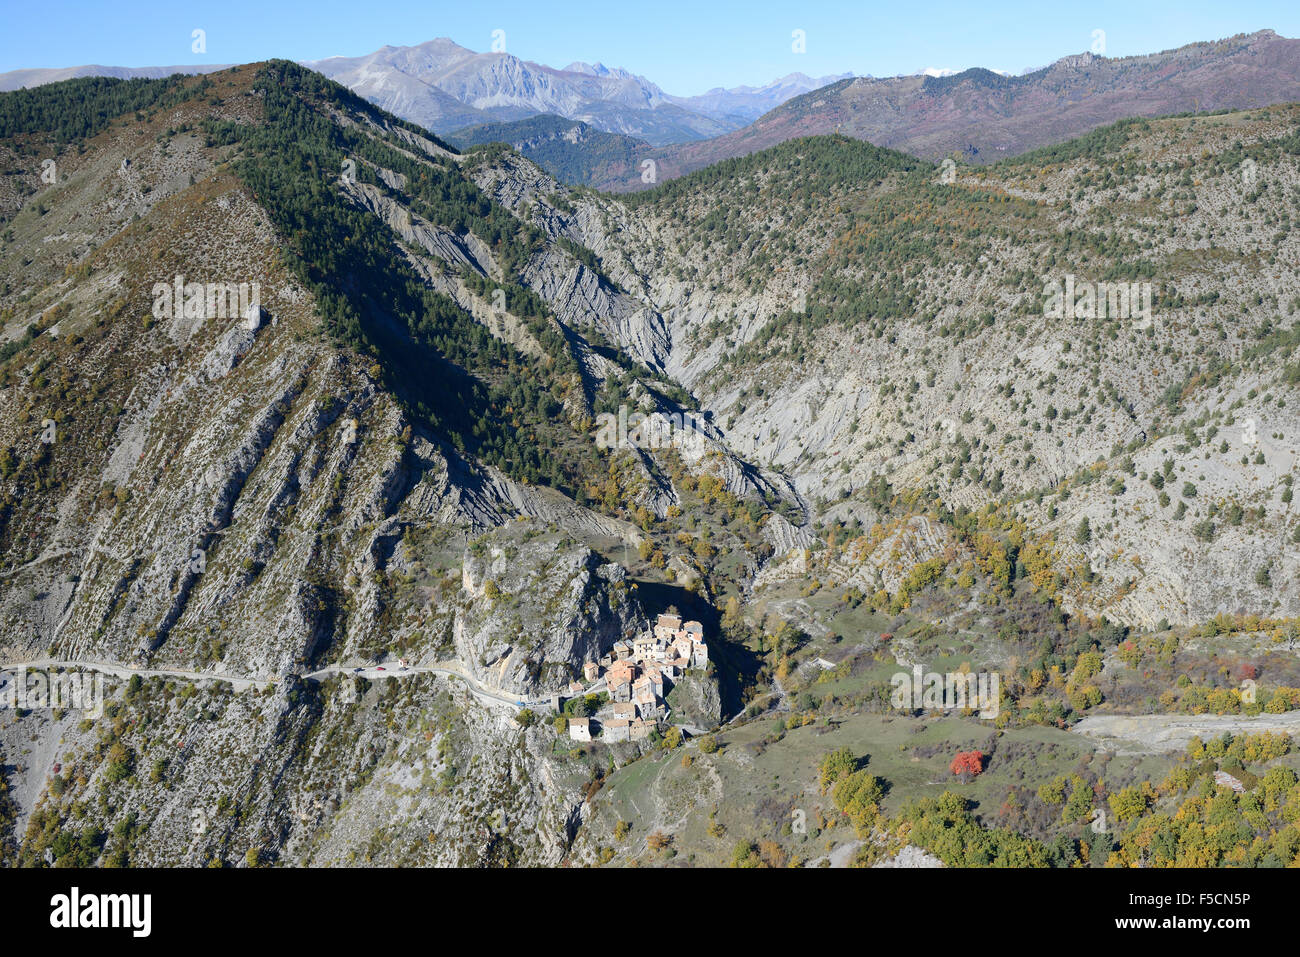 AERIAL VIEW. Small village curiously perched on a rocky outcrop in a remote area. Auvare, Alpes-Maritimes, French Riviera's backcountry, France. Stock Photo